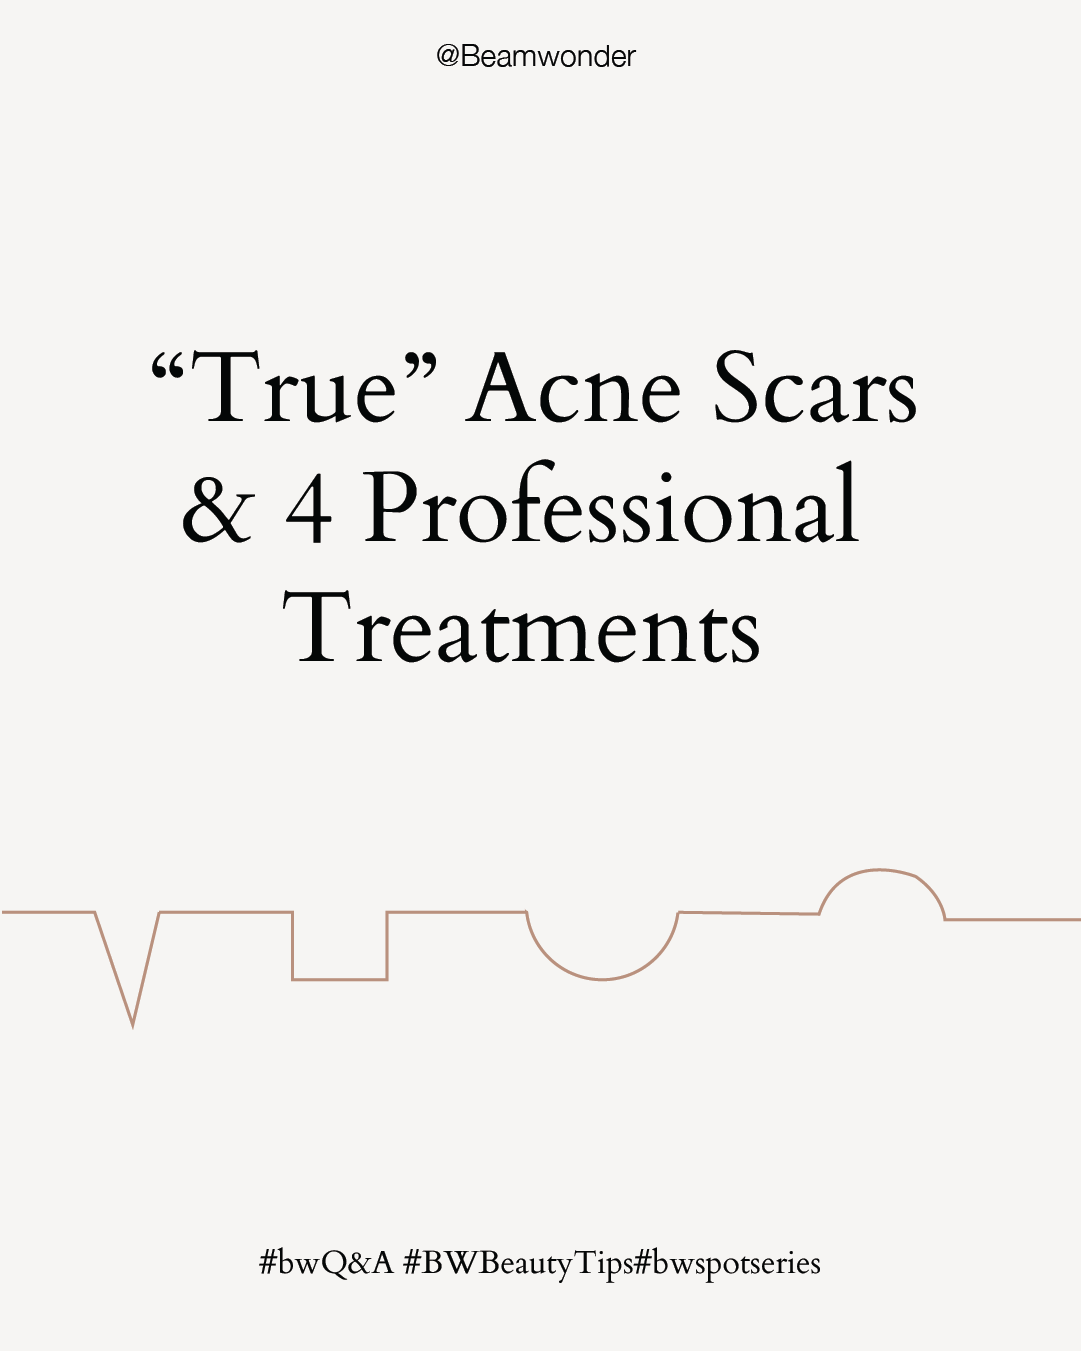 “True Acne Scars” and 4 Professional Treatments